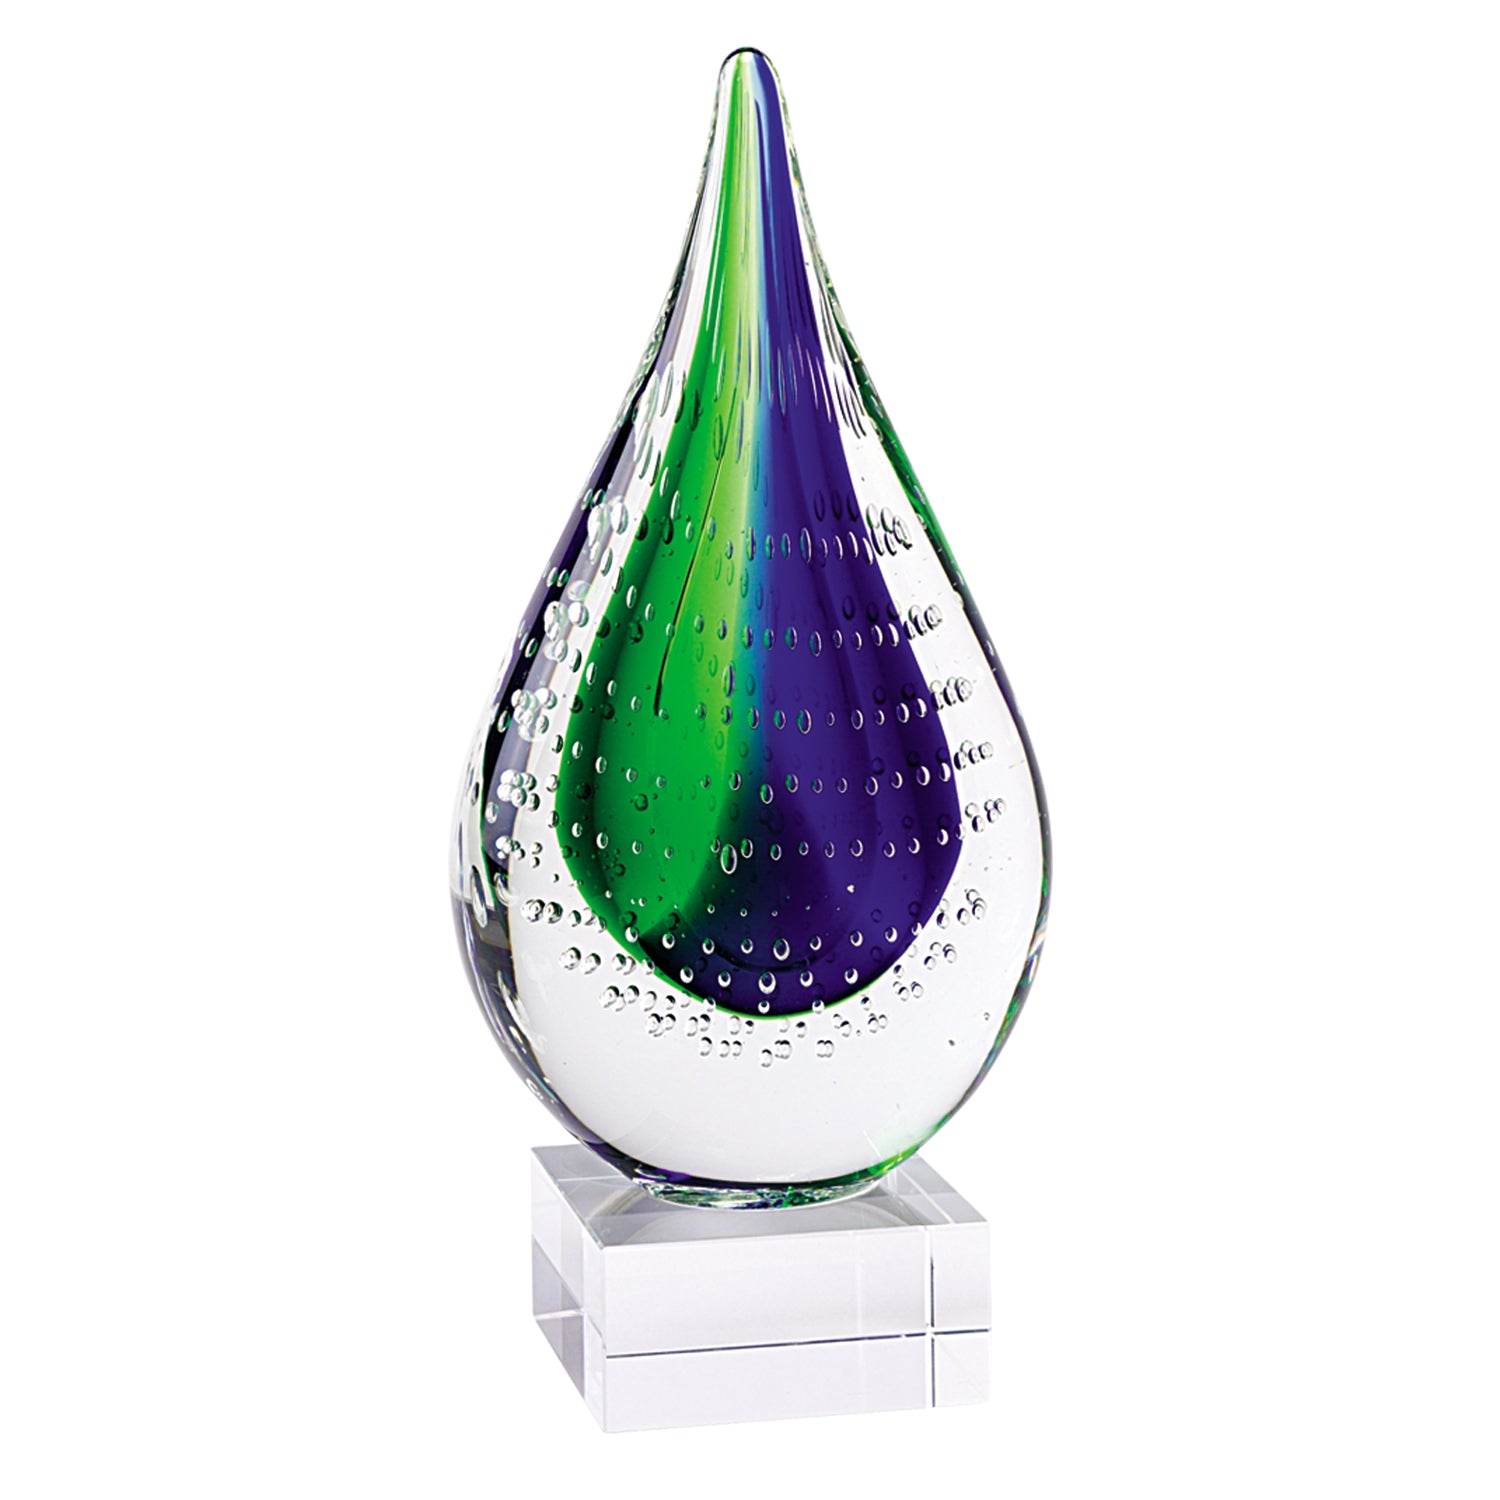 11" Clear Blue and Green Murano Glass Modern Abstract Tabletop Sculpture